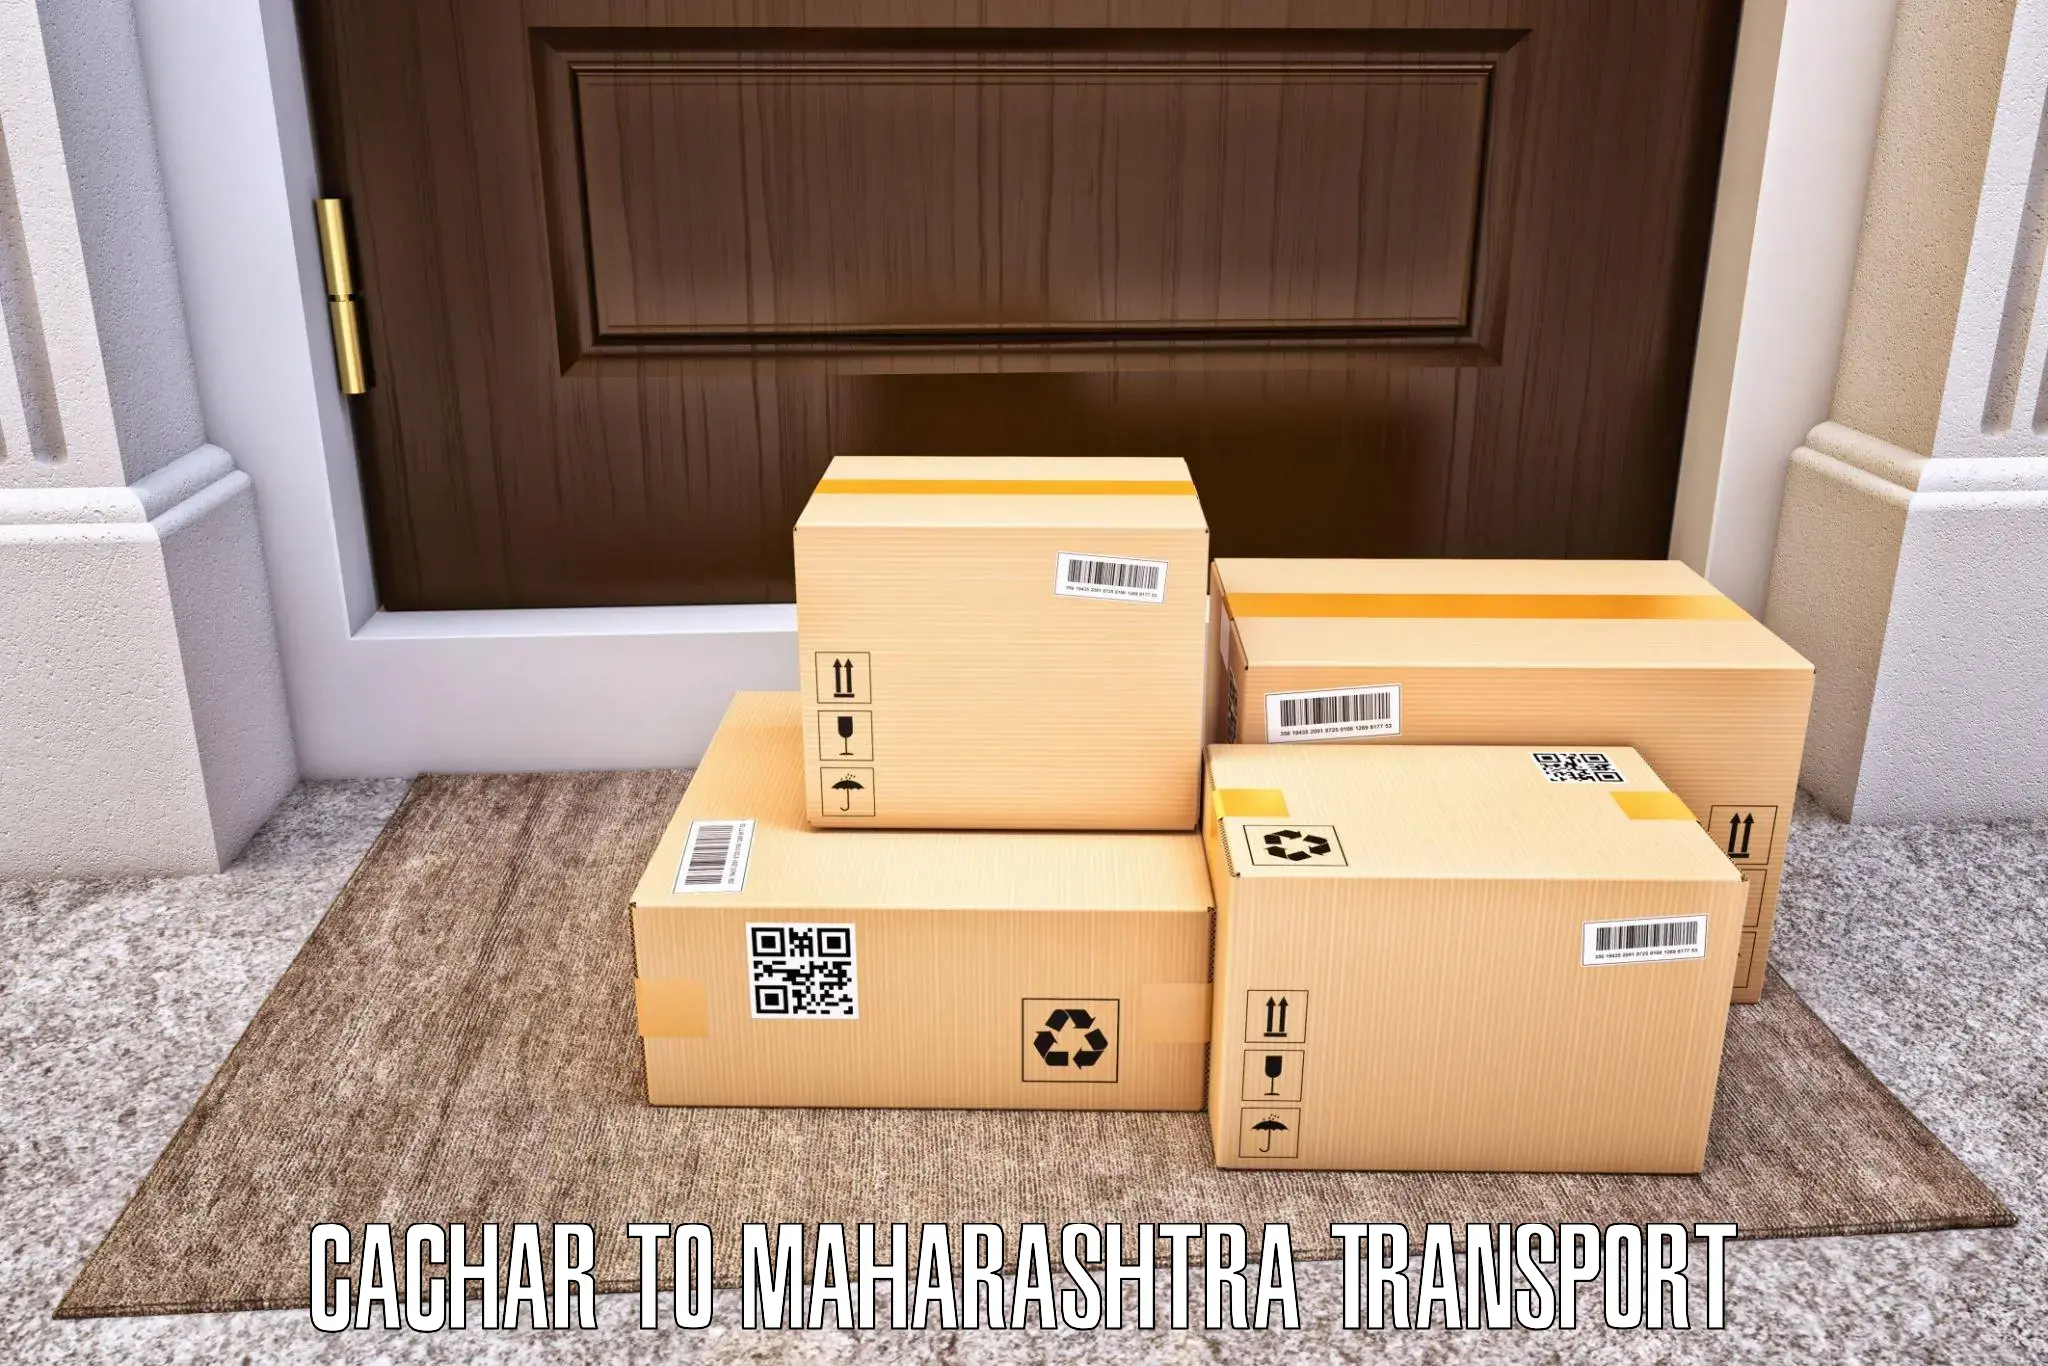 Daily parcel service transport in Cachar to Loni Ahmednagar